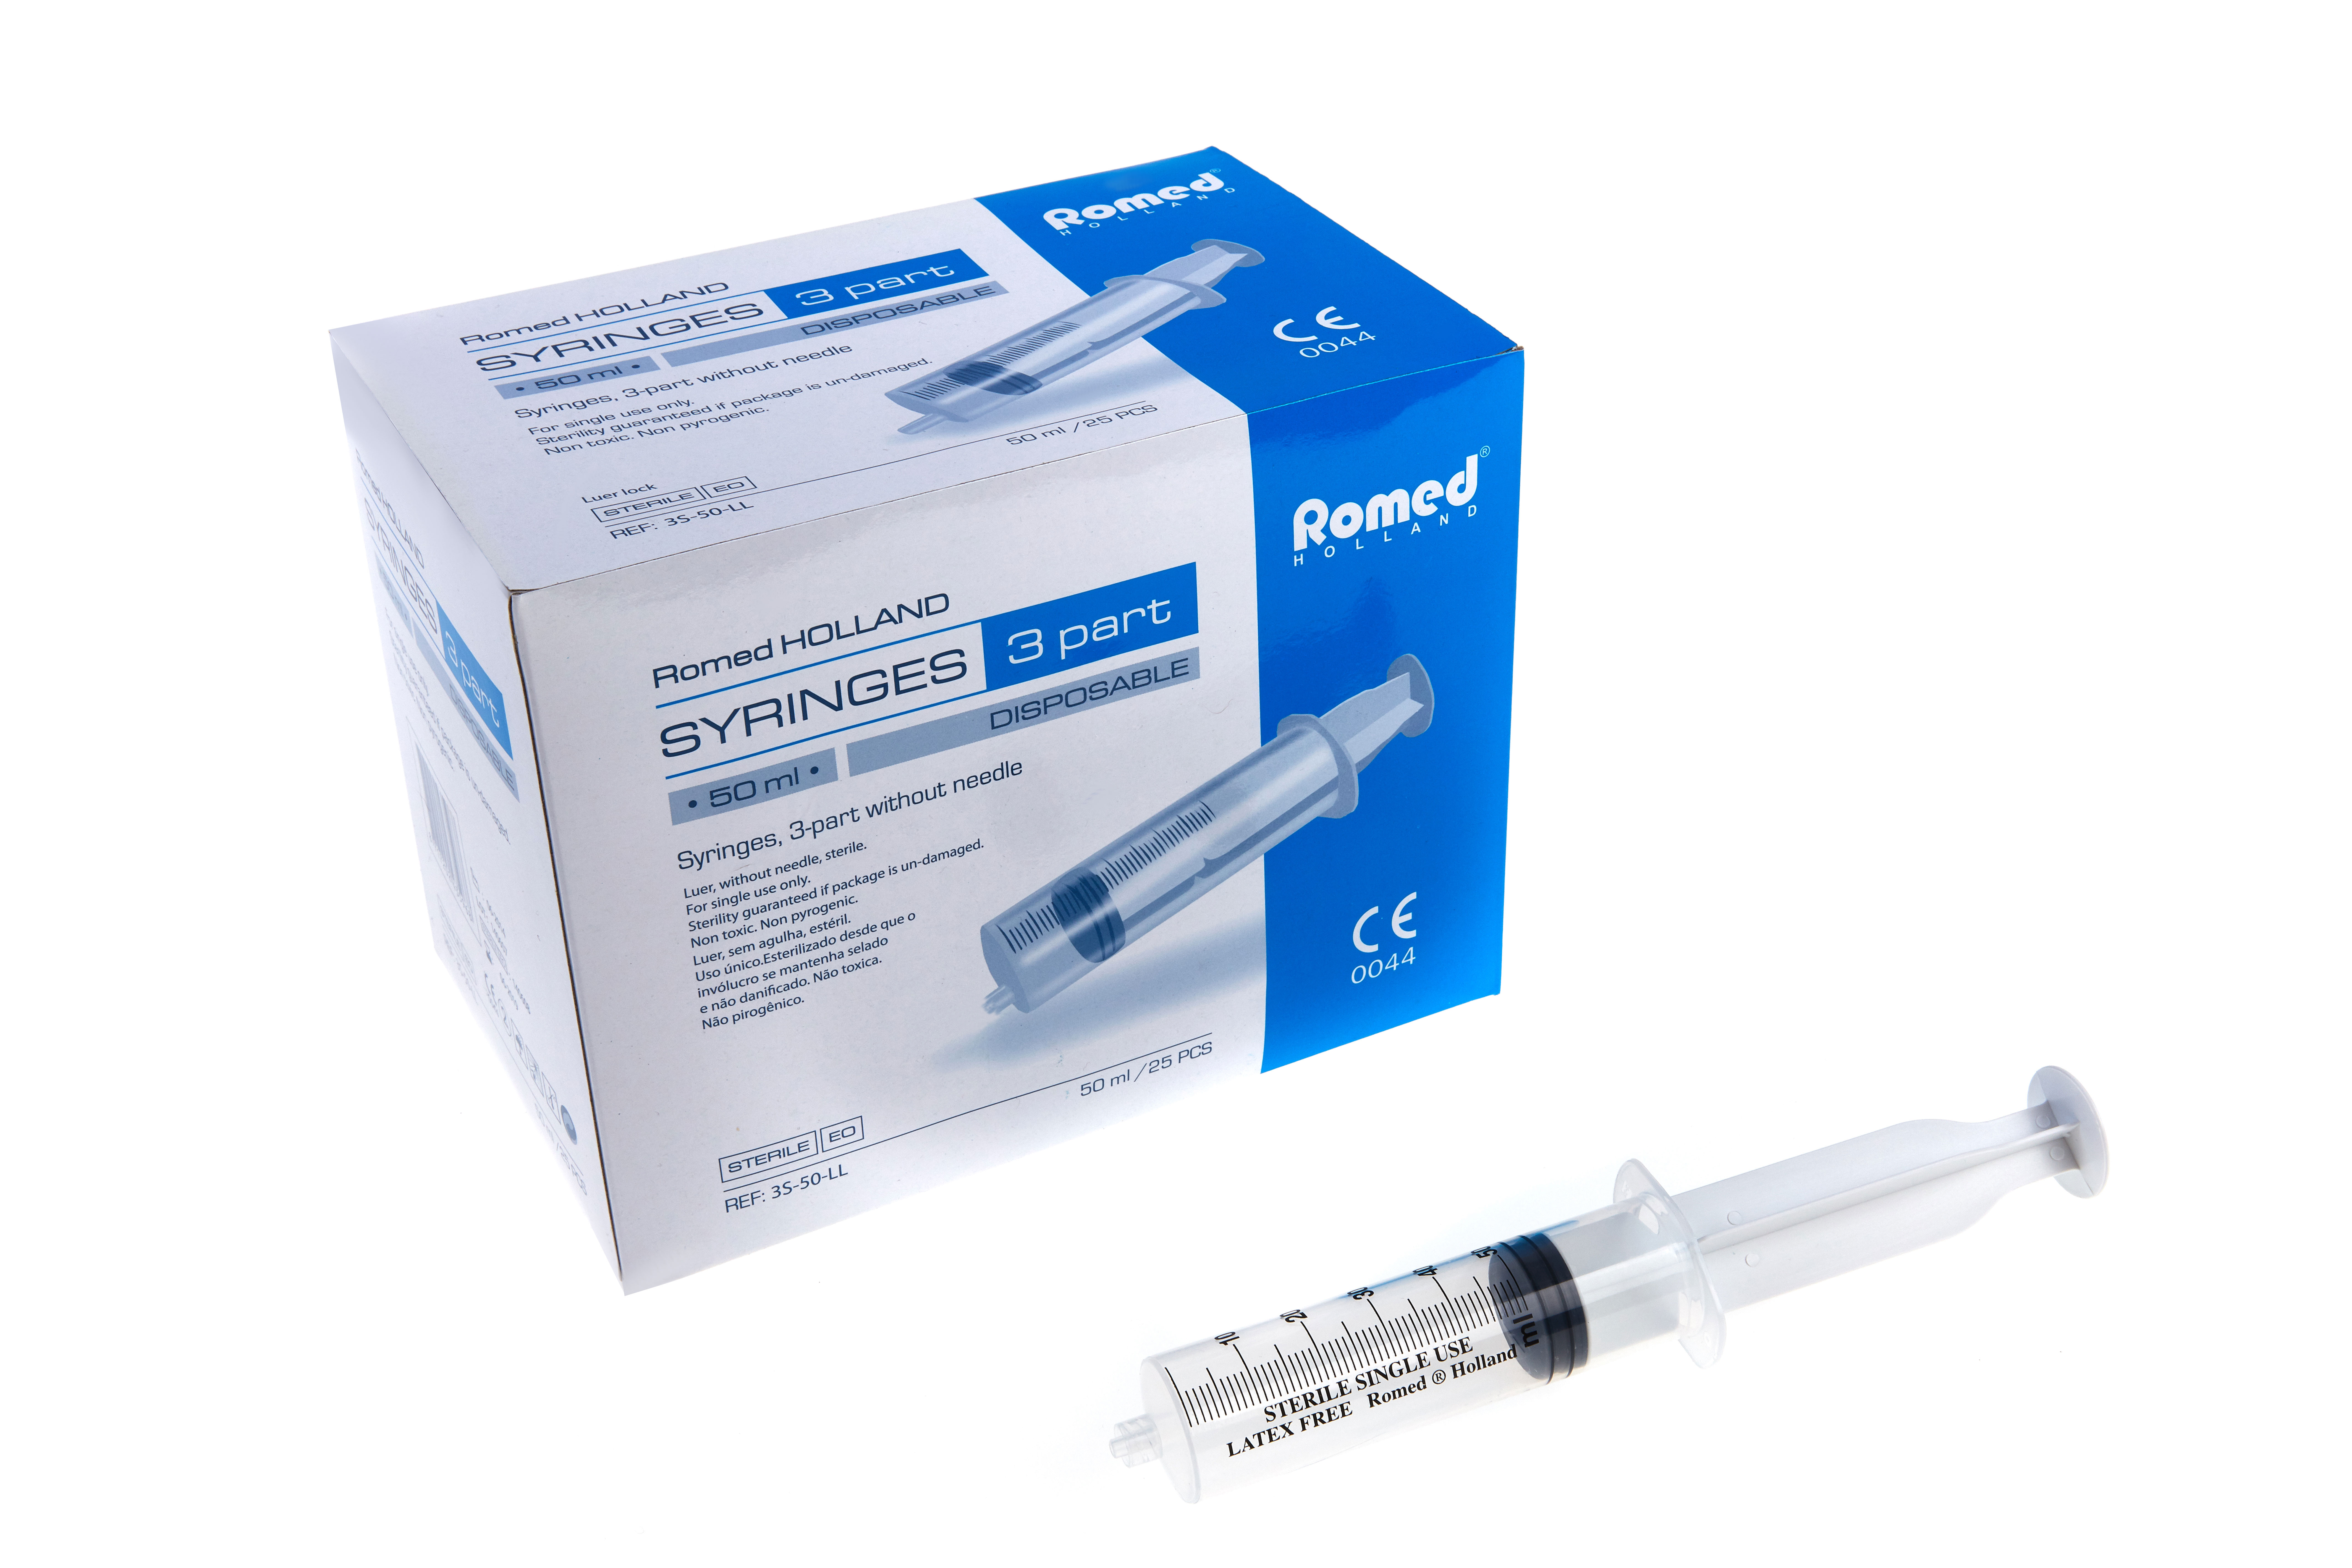 3S-50-LL Romed 3-part syringes 50ml, without needle, luer lock, sterile per piece, 25 pieces in an inner box, 16 x 25 pcs = 400 pcs in a carton.